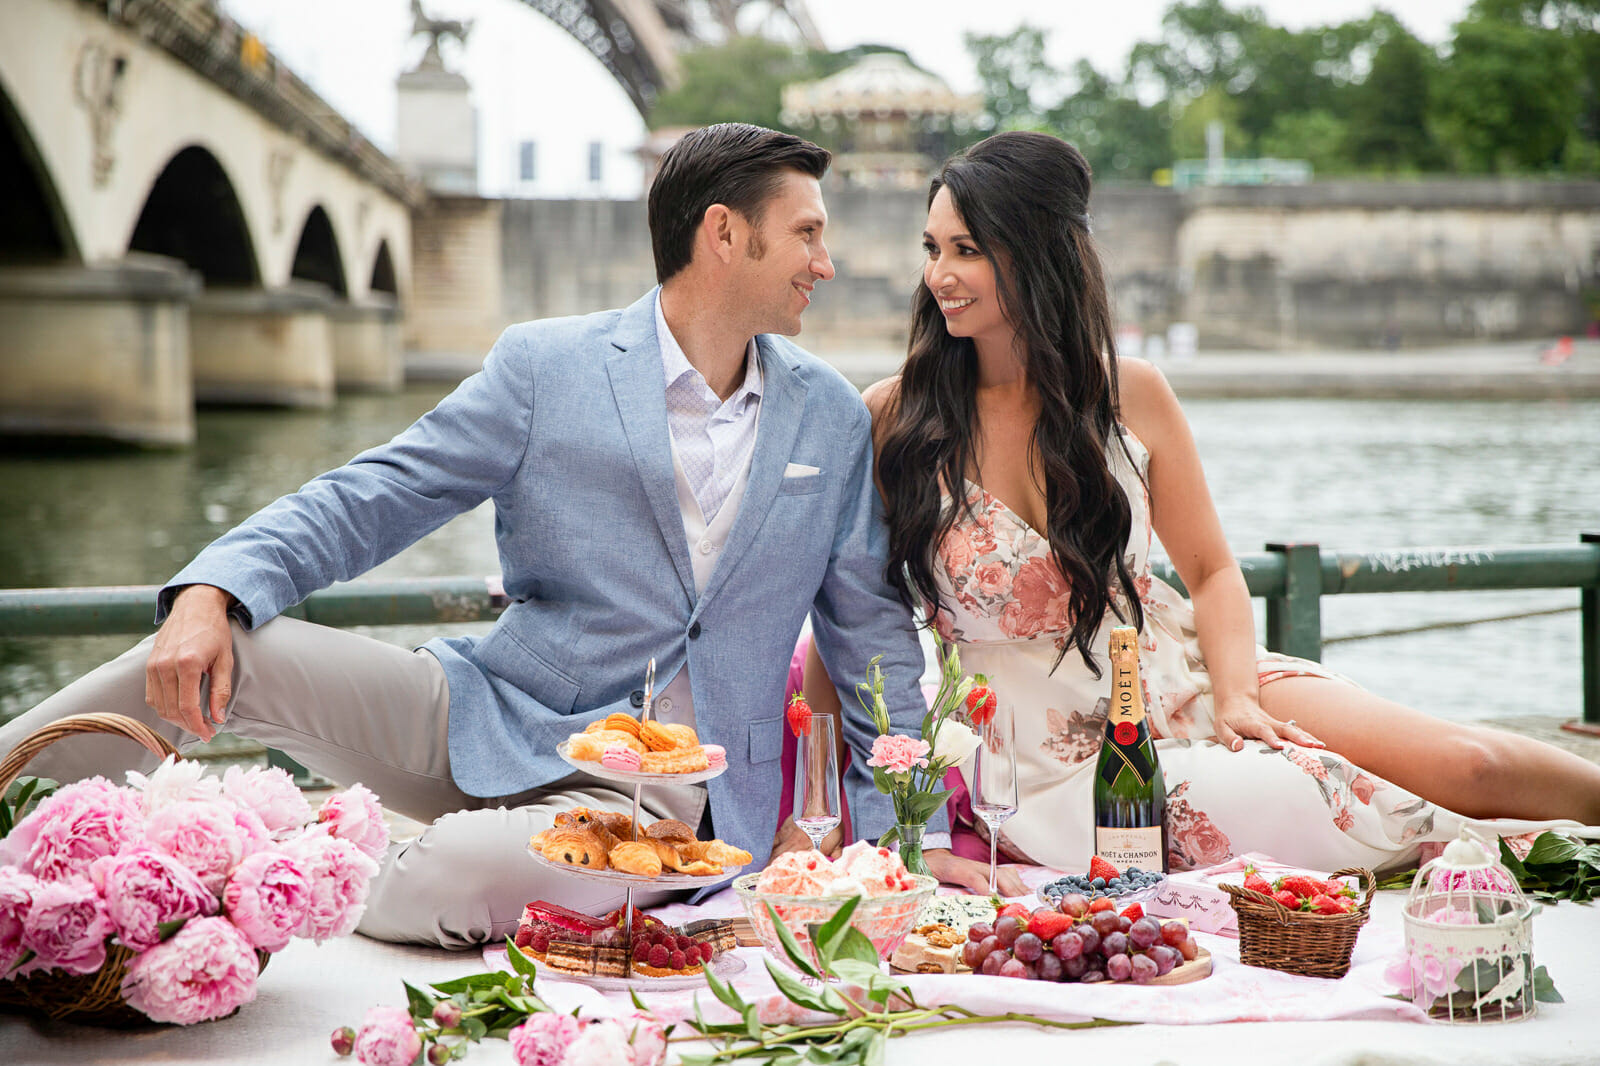 Creative Paris proposal ideas with luxury picnic at the Eiffel Tower